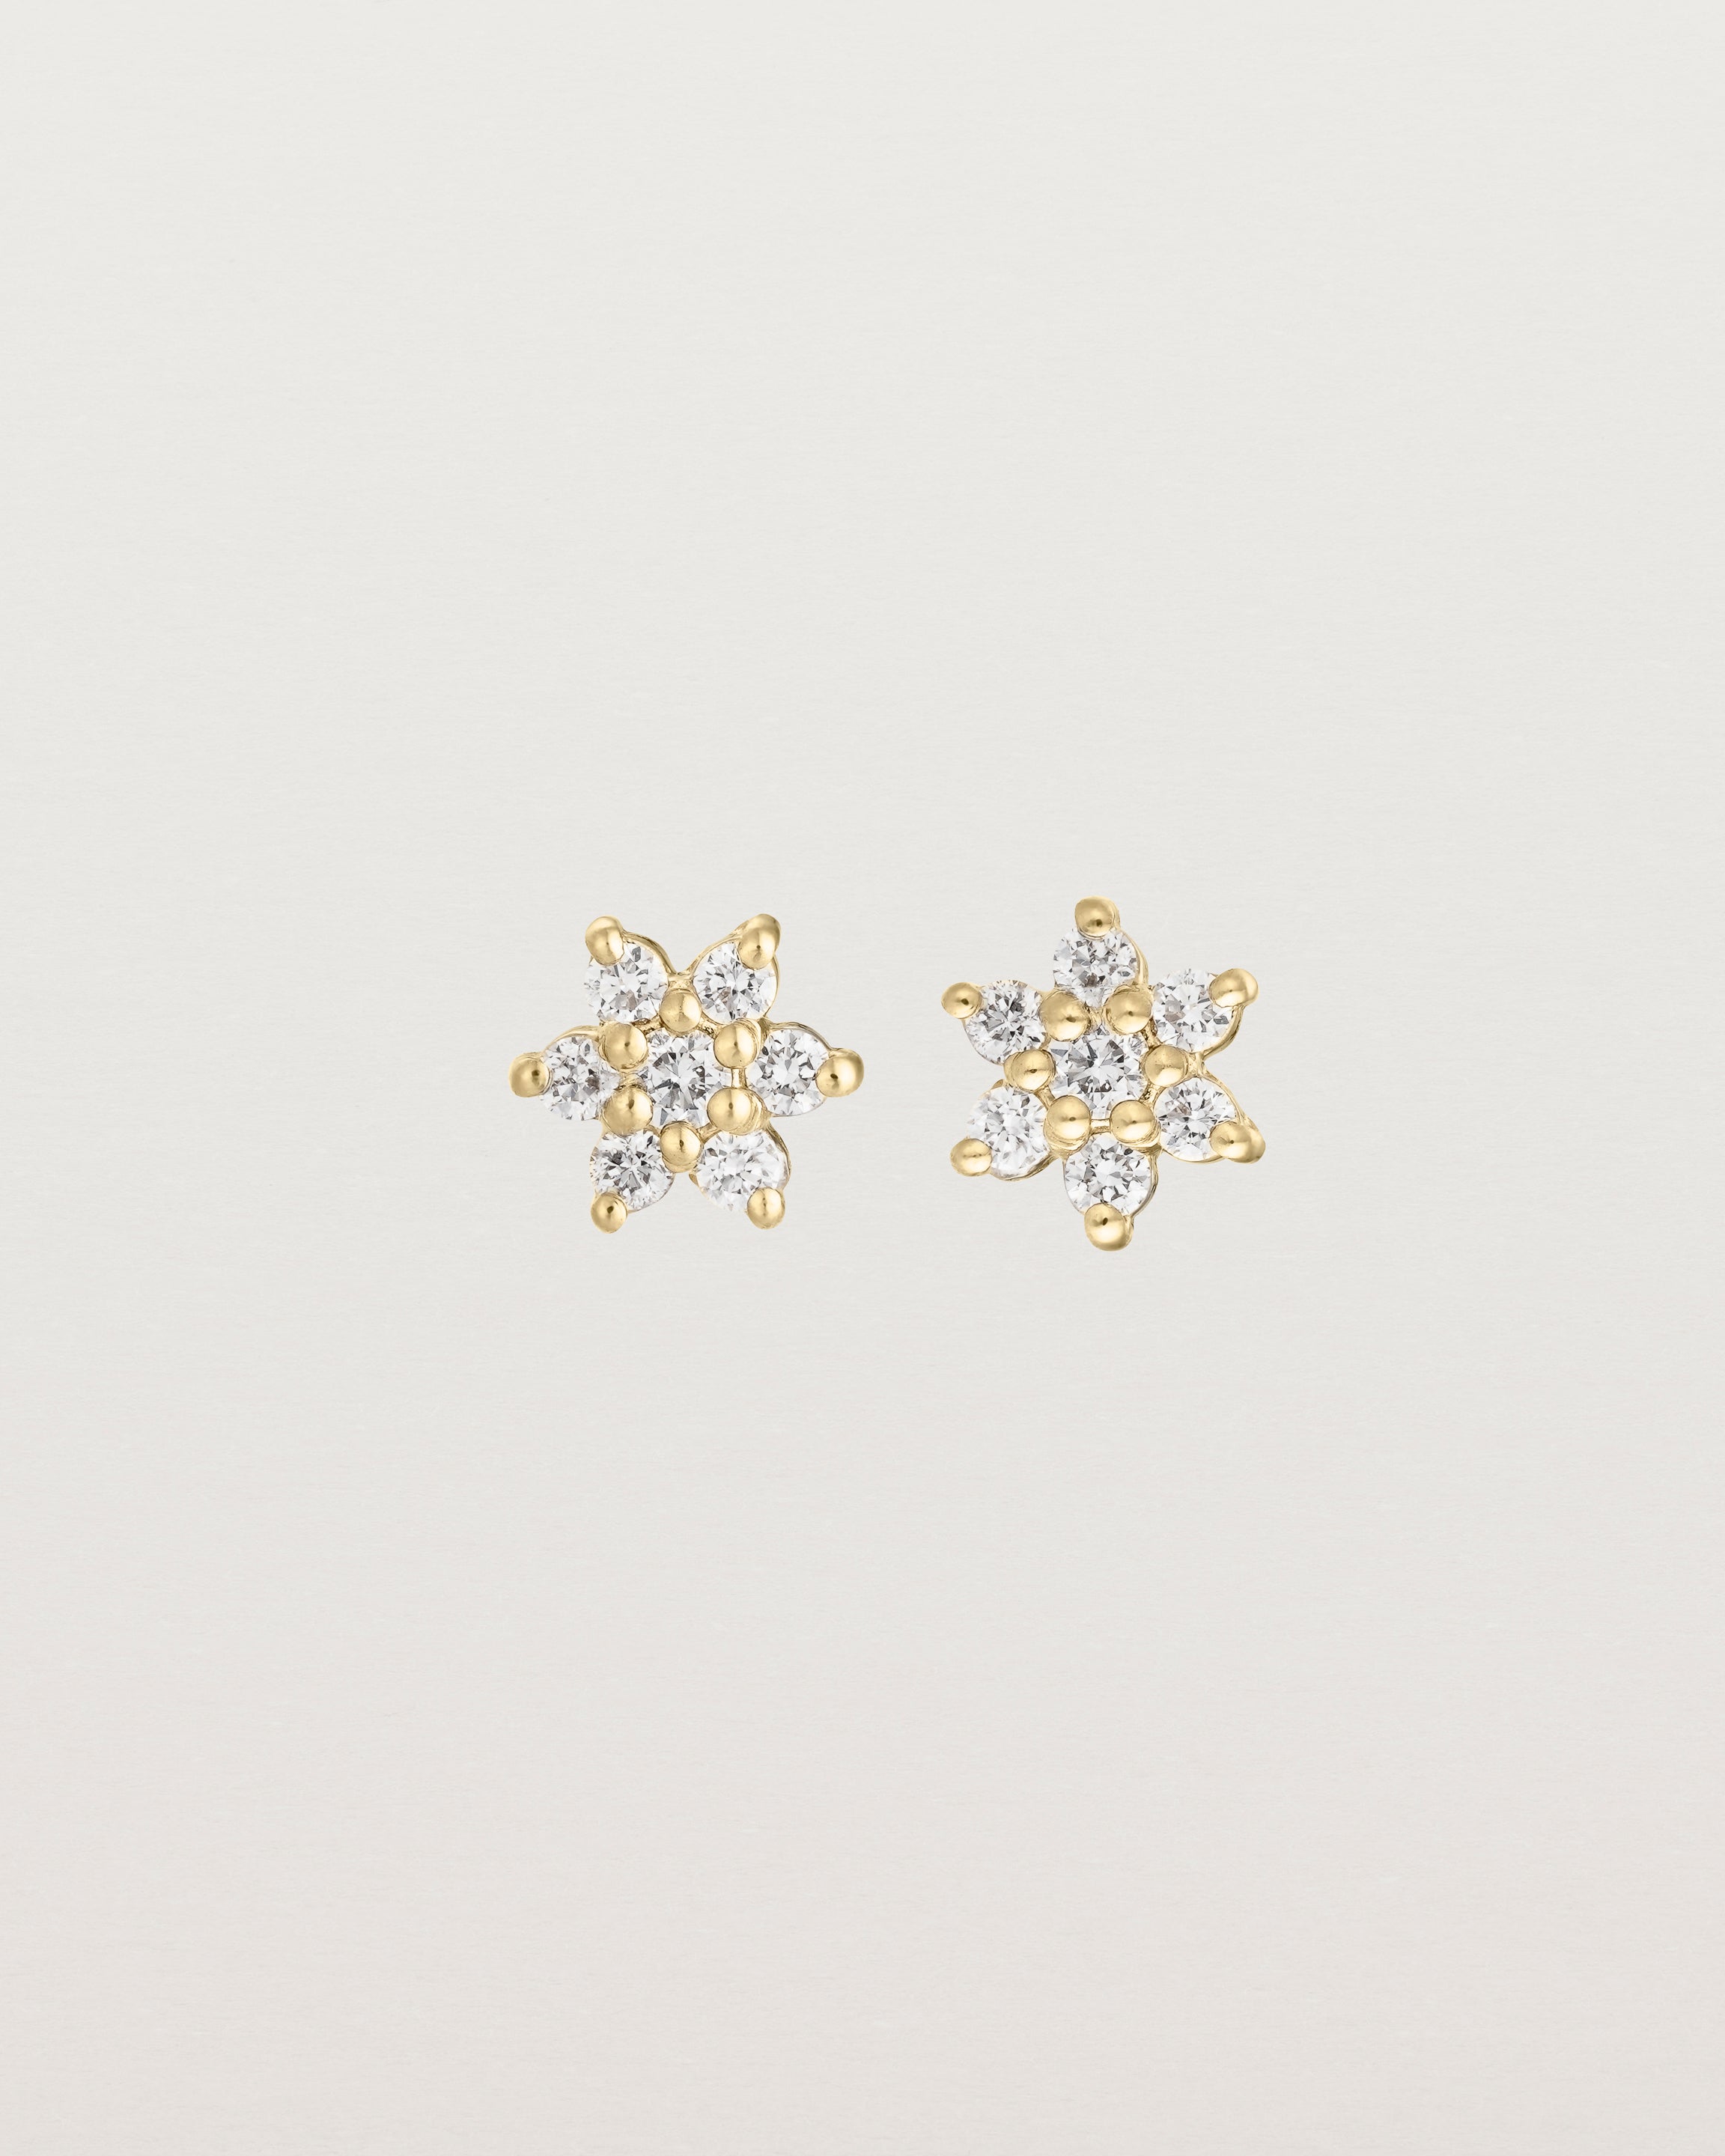 Front image of the petit starburst studs with white diamonds